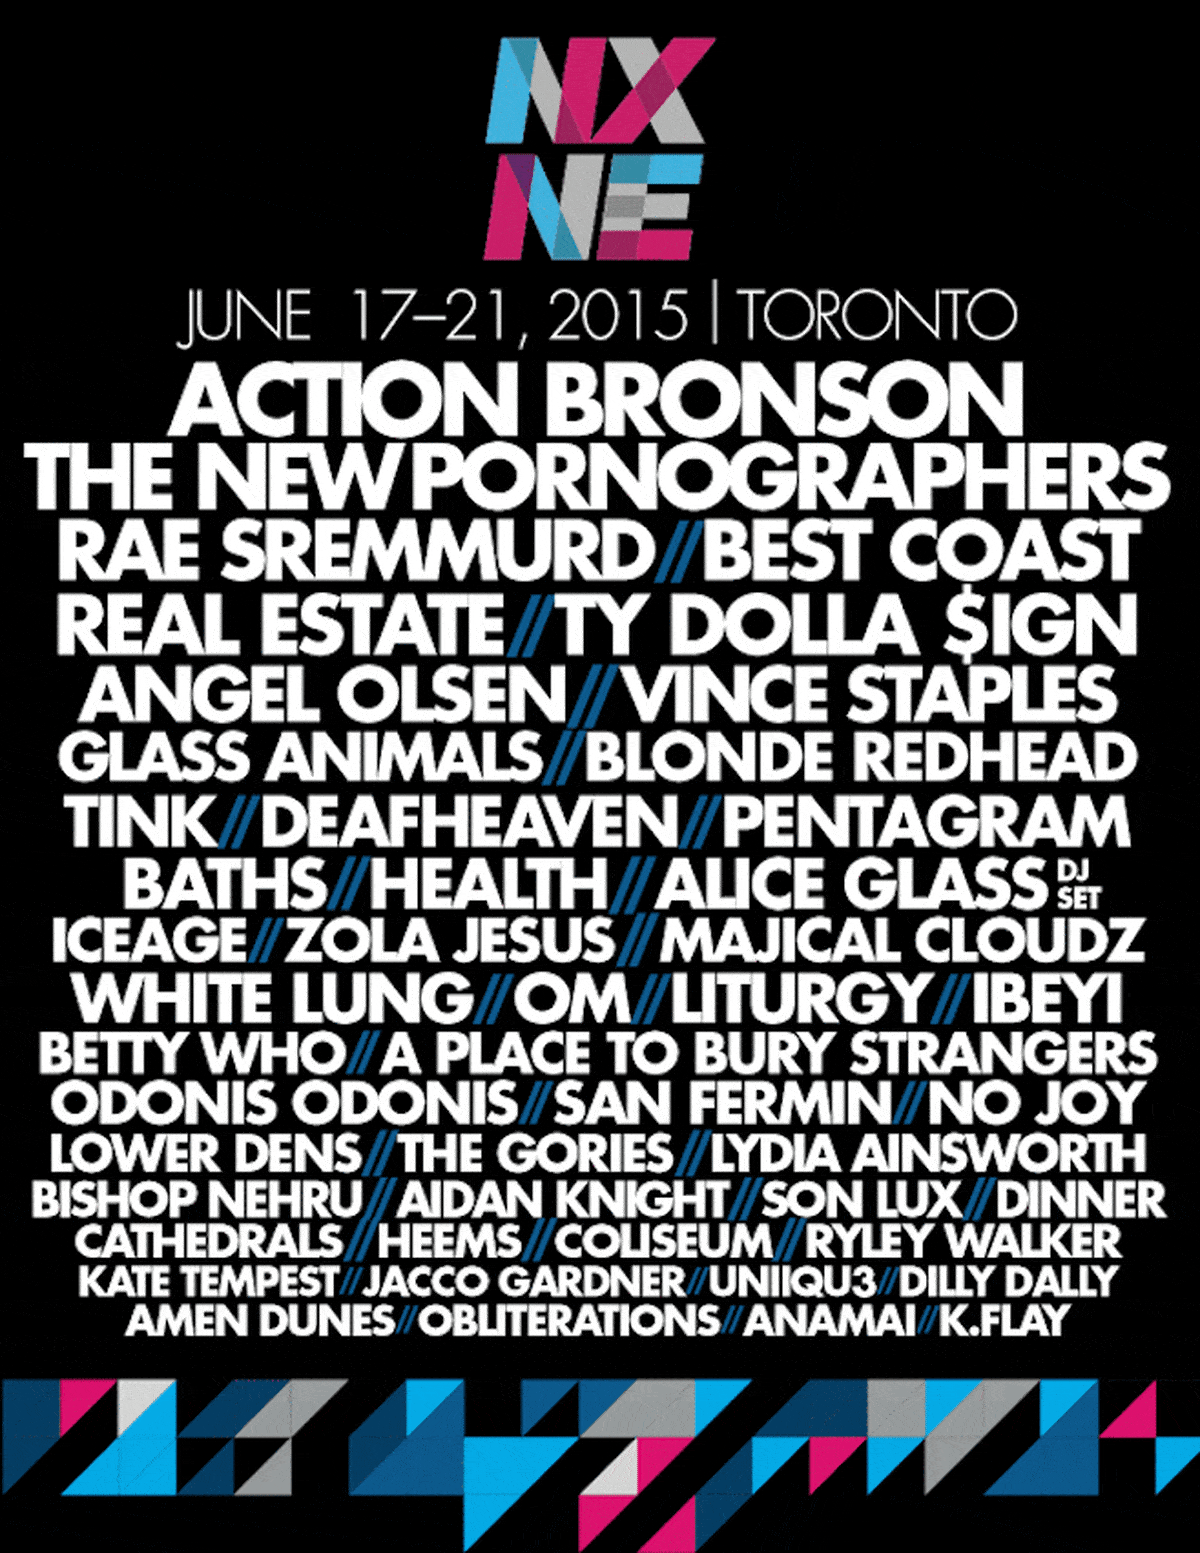 NXNE Announces Initial Lineup Including Action Bronson ...